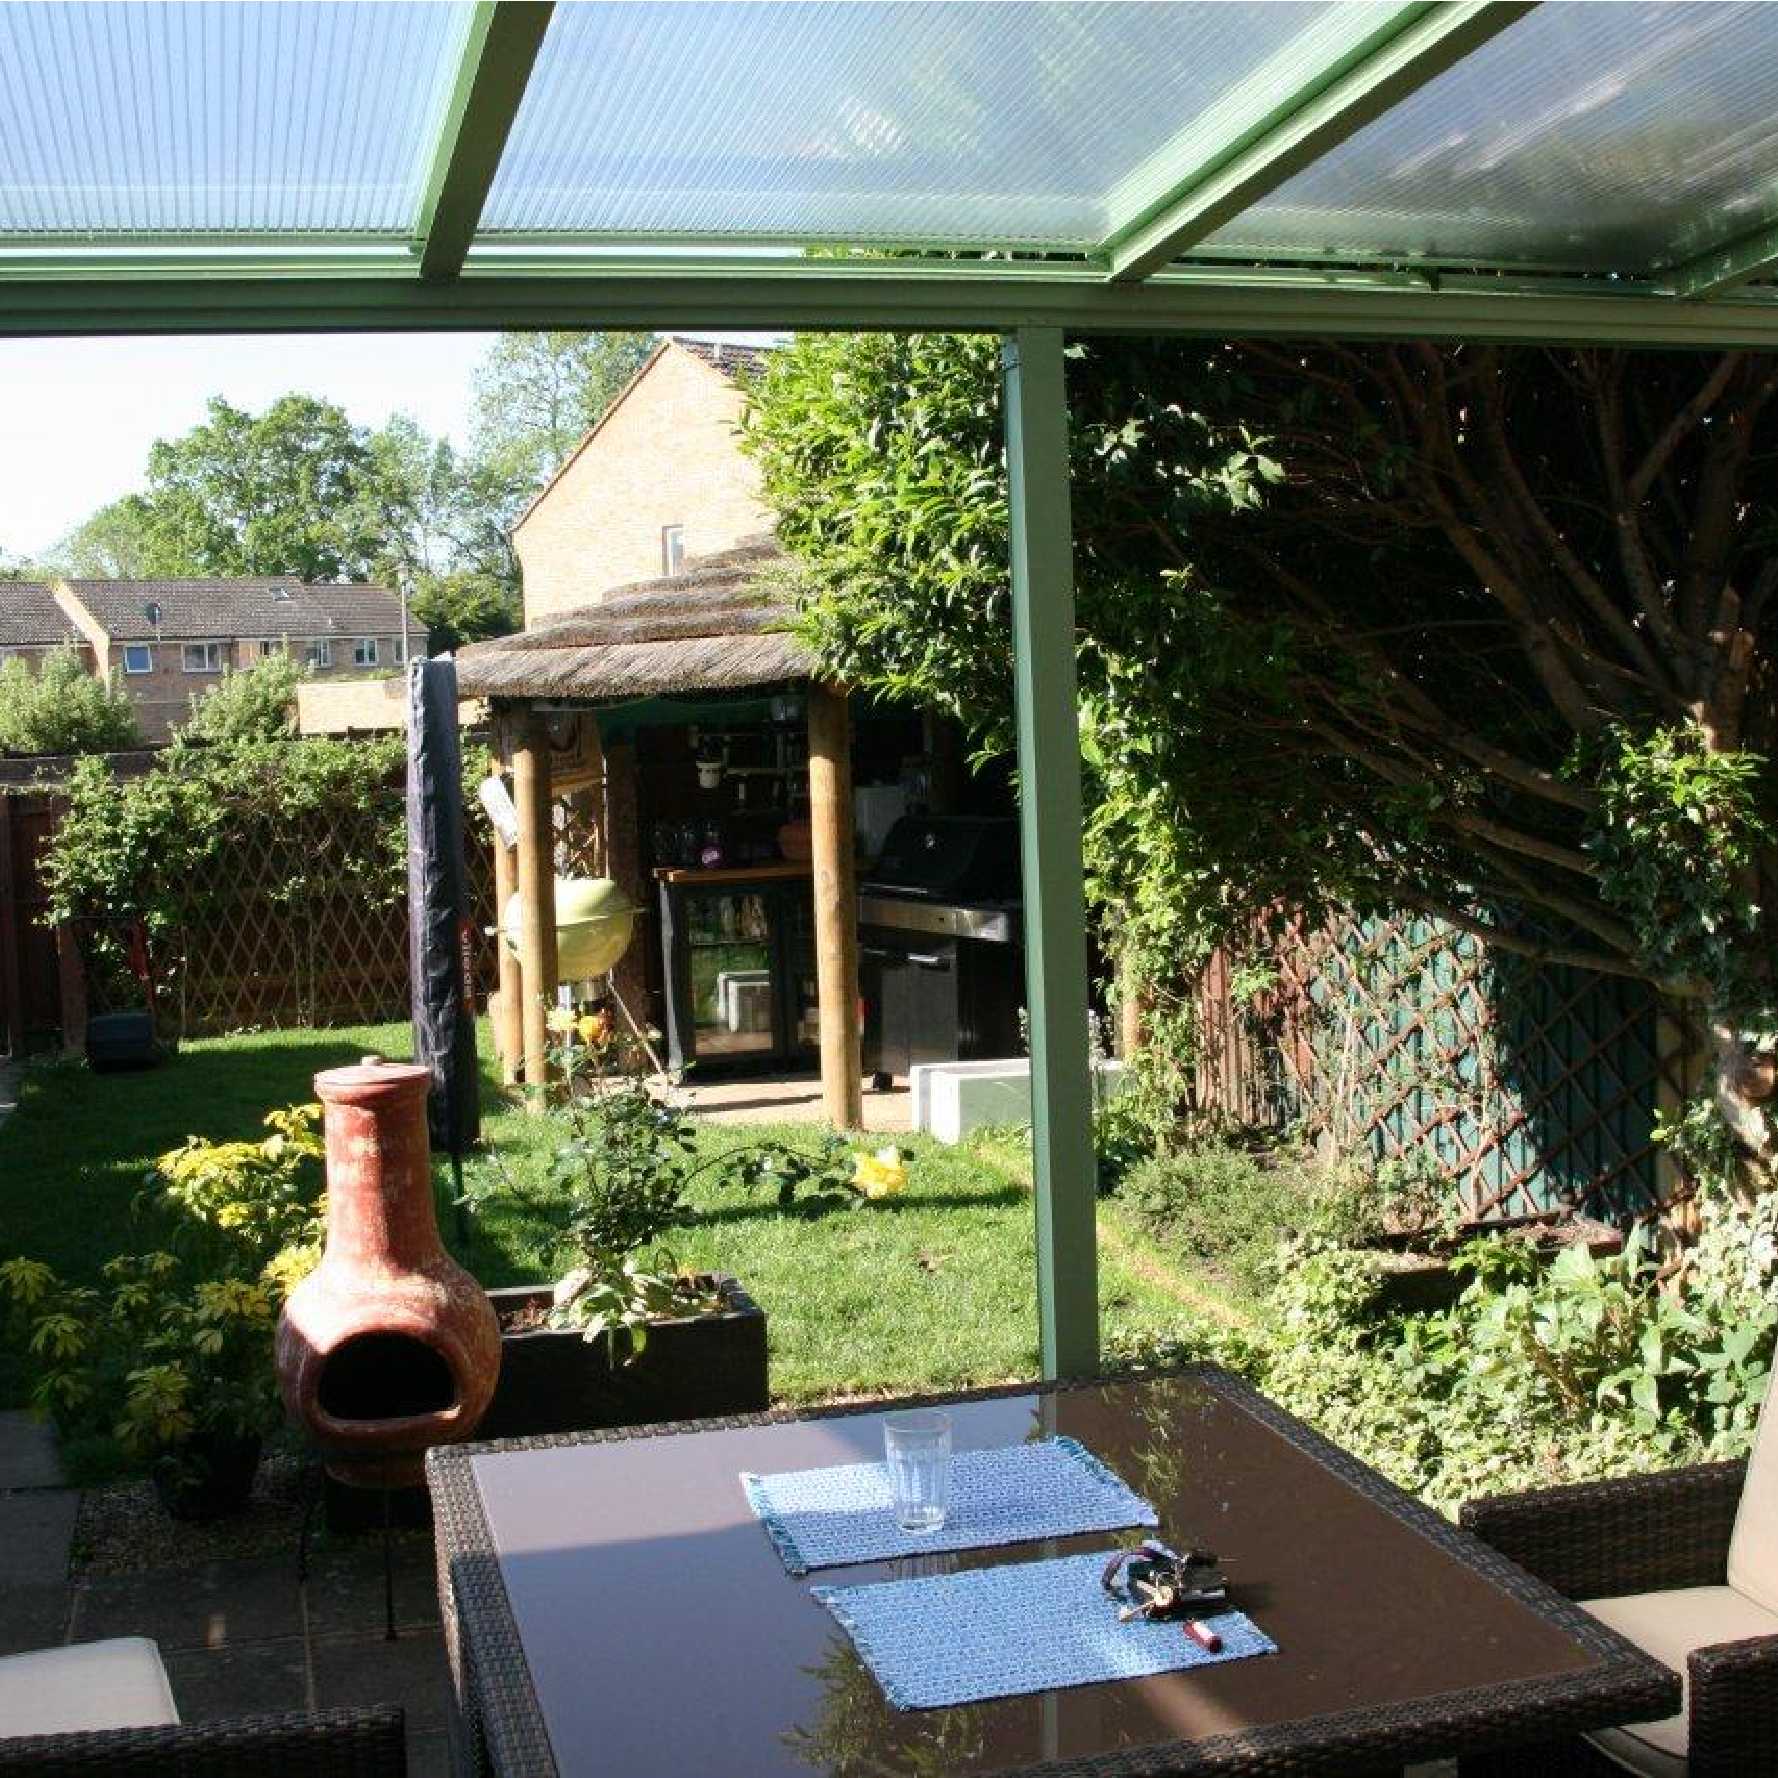 Affordable Omega Smart Lean-To Canopy, White with 16mm Polycarbonate Glazing - 6.0m (W) x 1.5m (P), (3) Supporting Posts